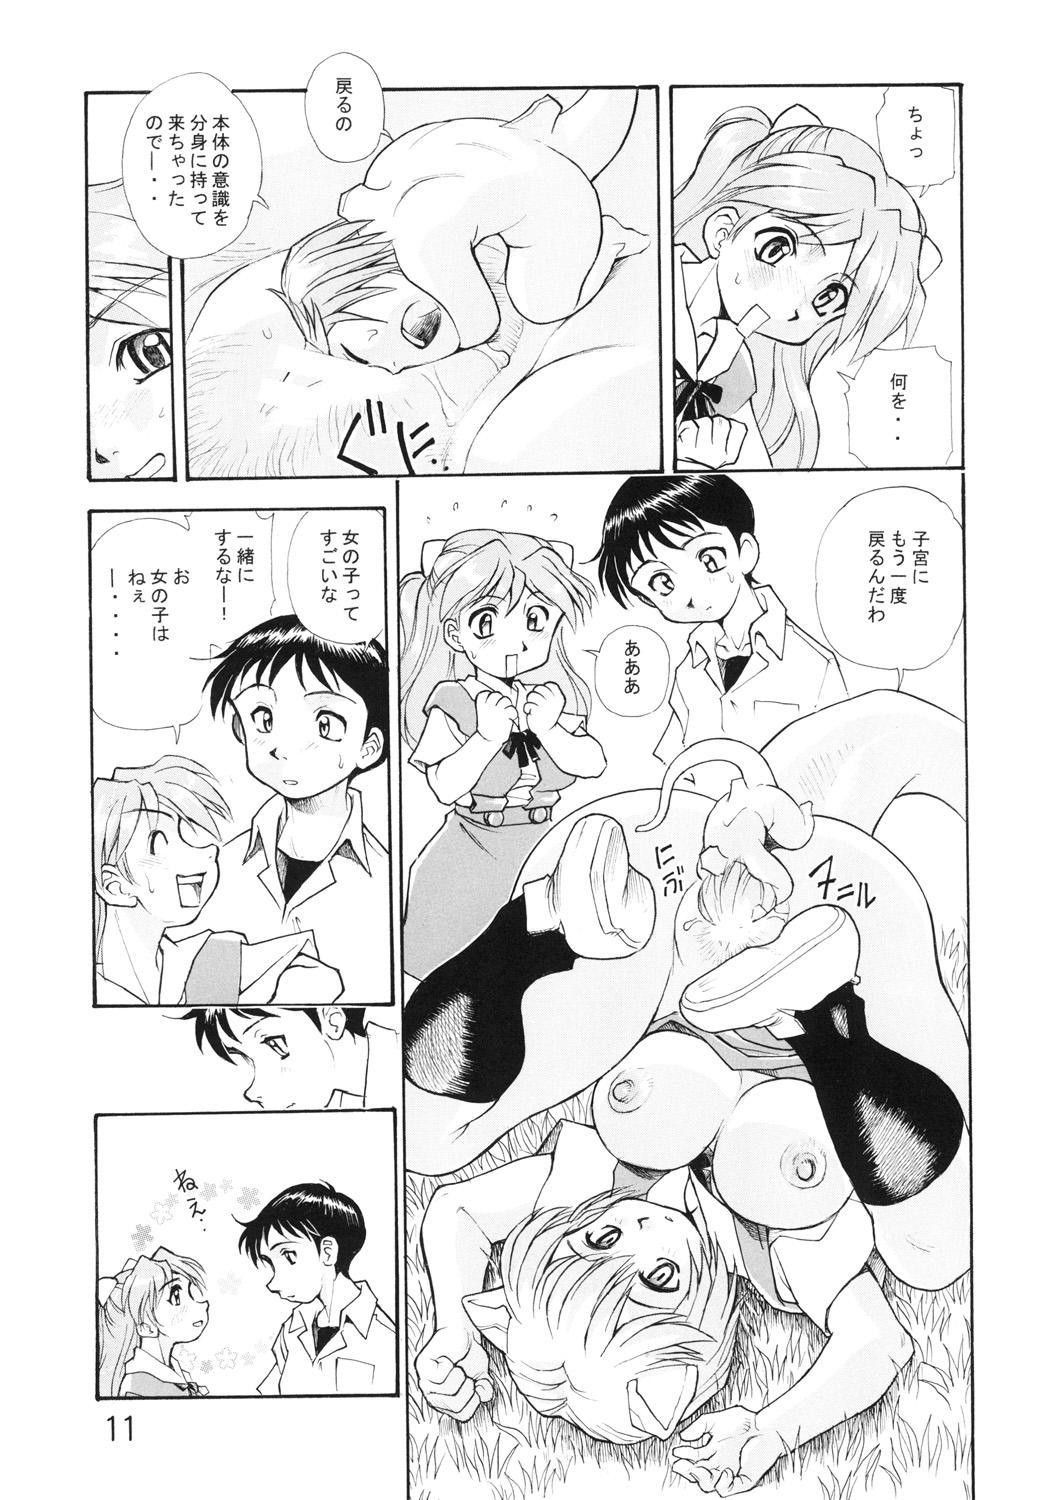 Family Roleplay Harami Shito Ayanami-san Soushuuhen - Neon genesis evangelion Speculum - Page 10